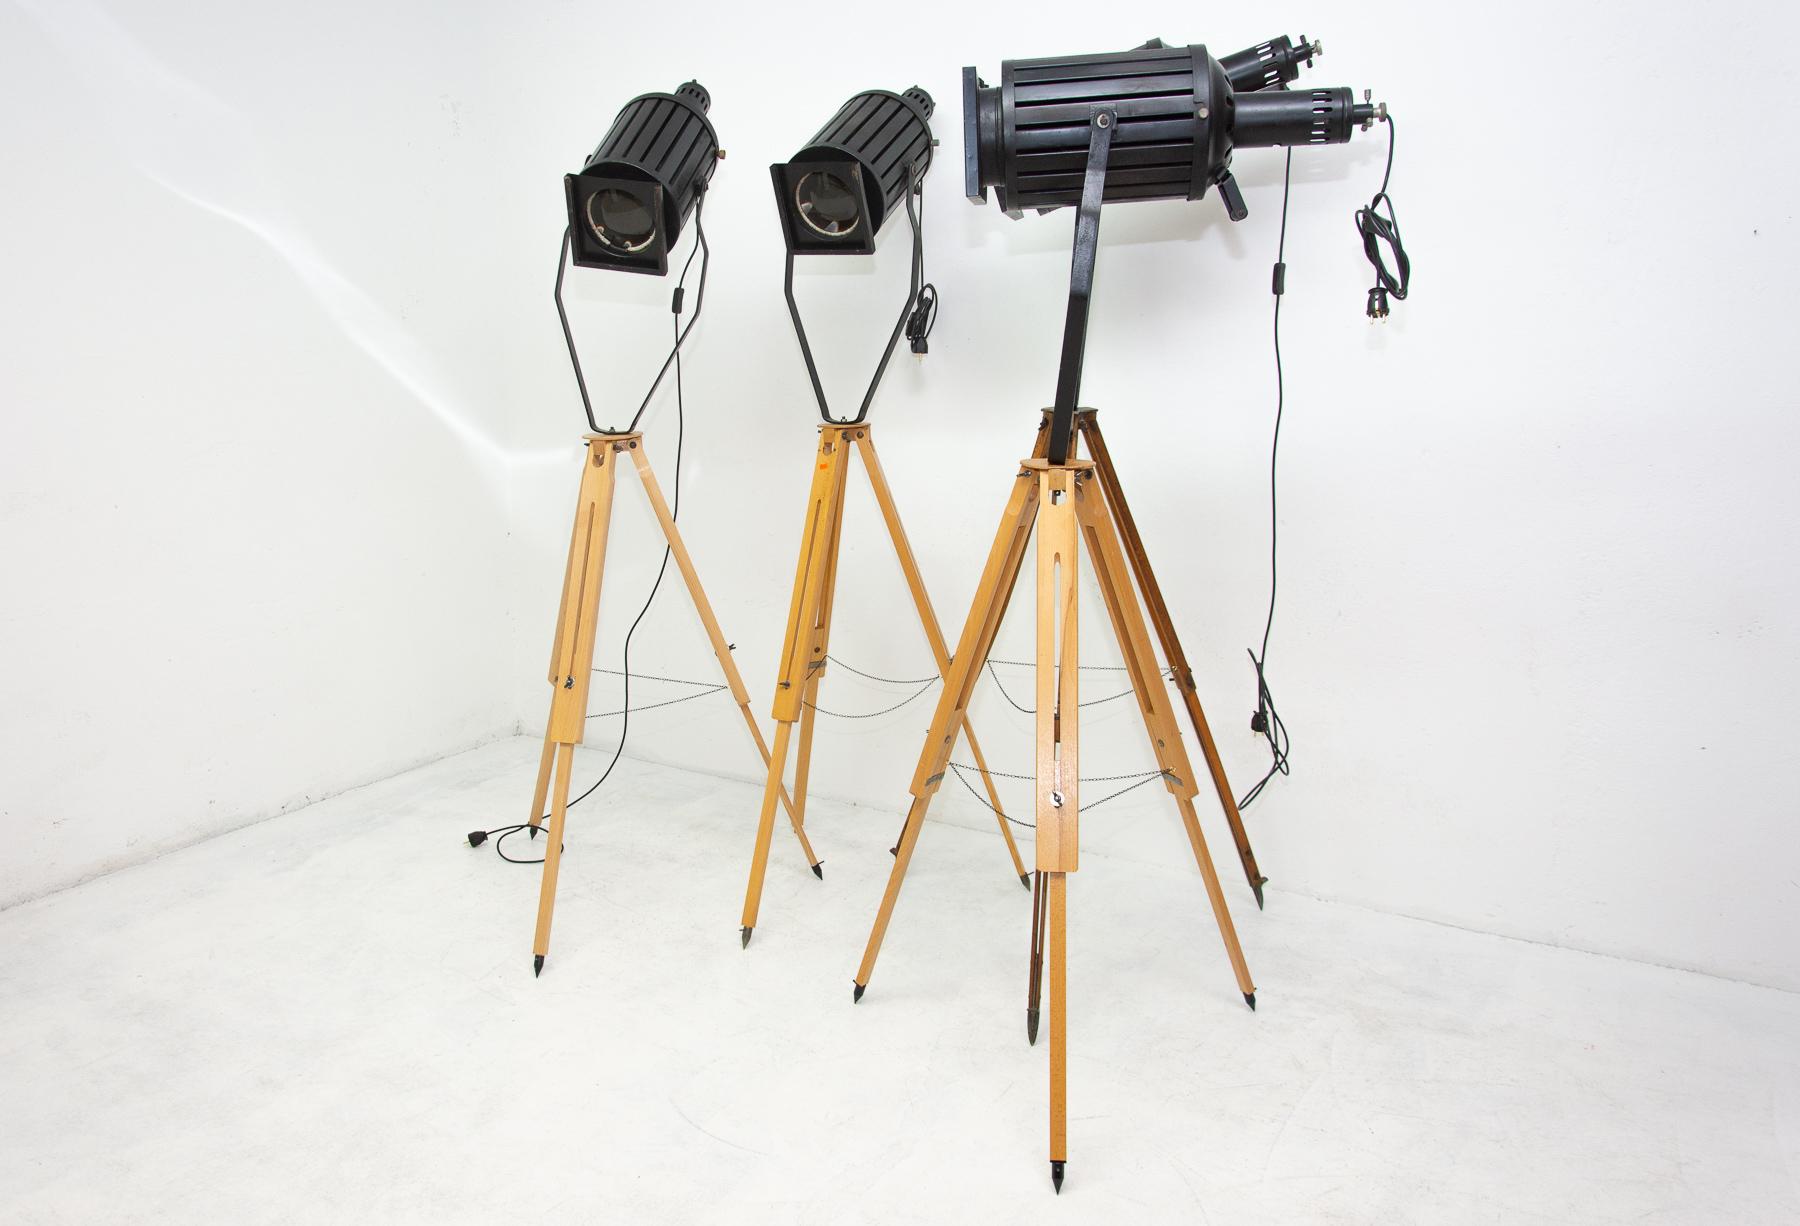 Set of vintage industrial spotlights on a wooden tripod. They were made in the former Czechoslovakia in the 1960s.
Adjustable height and angle. It features an original large rounded shade. Provides a high level of lighting. An outstanding and